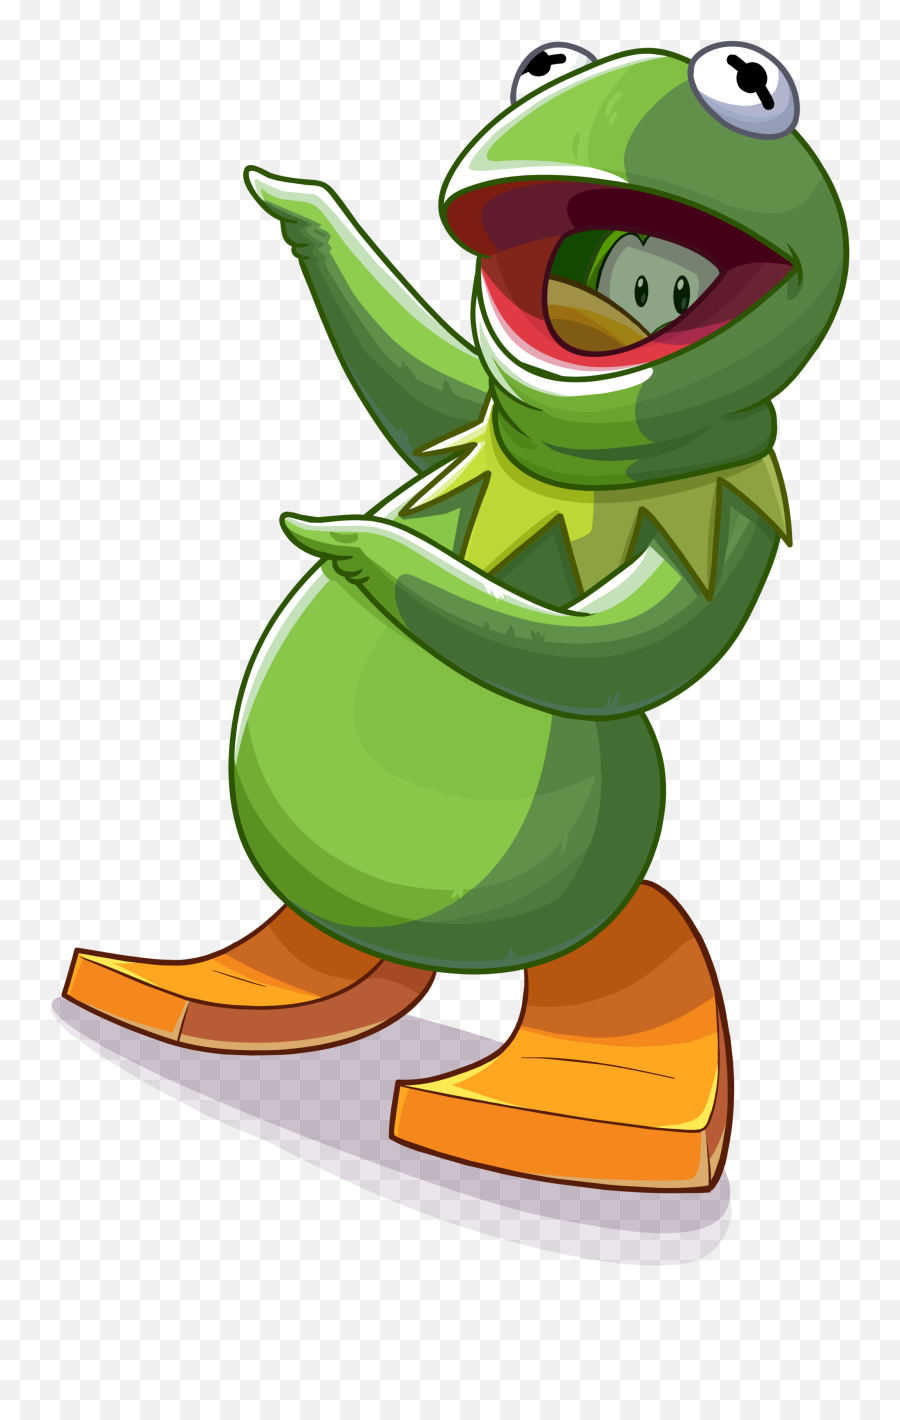 Kermit The Frog Png 5 Image - Kermit The Frog Club Penguin,Kermit The Frog Png